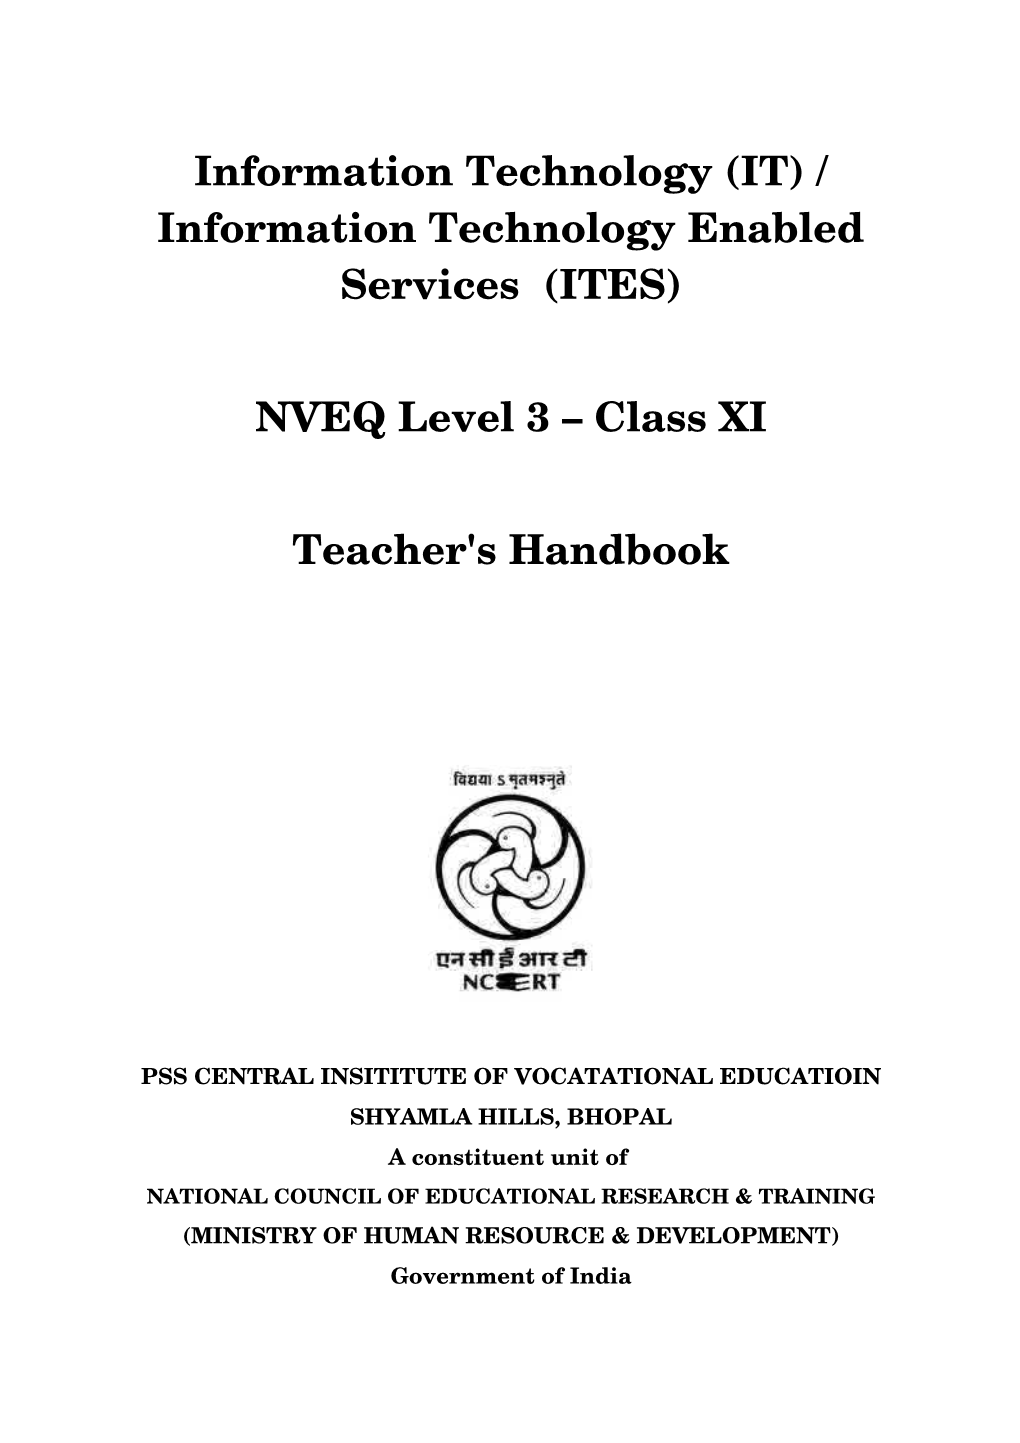 (IT) / Information Technology Enabled Services (ITES) NVEQ Level 3